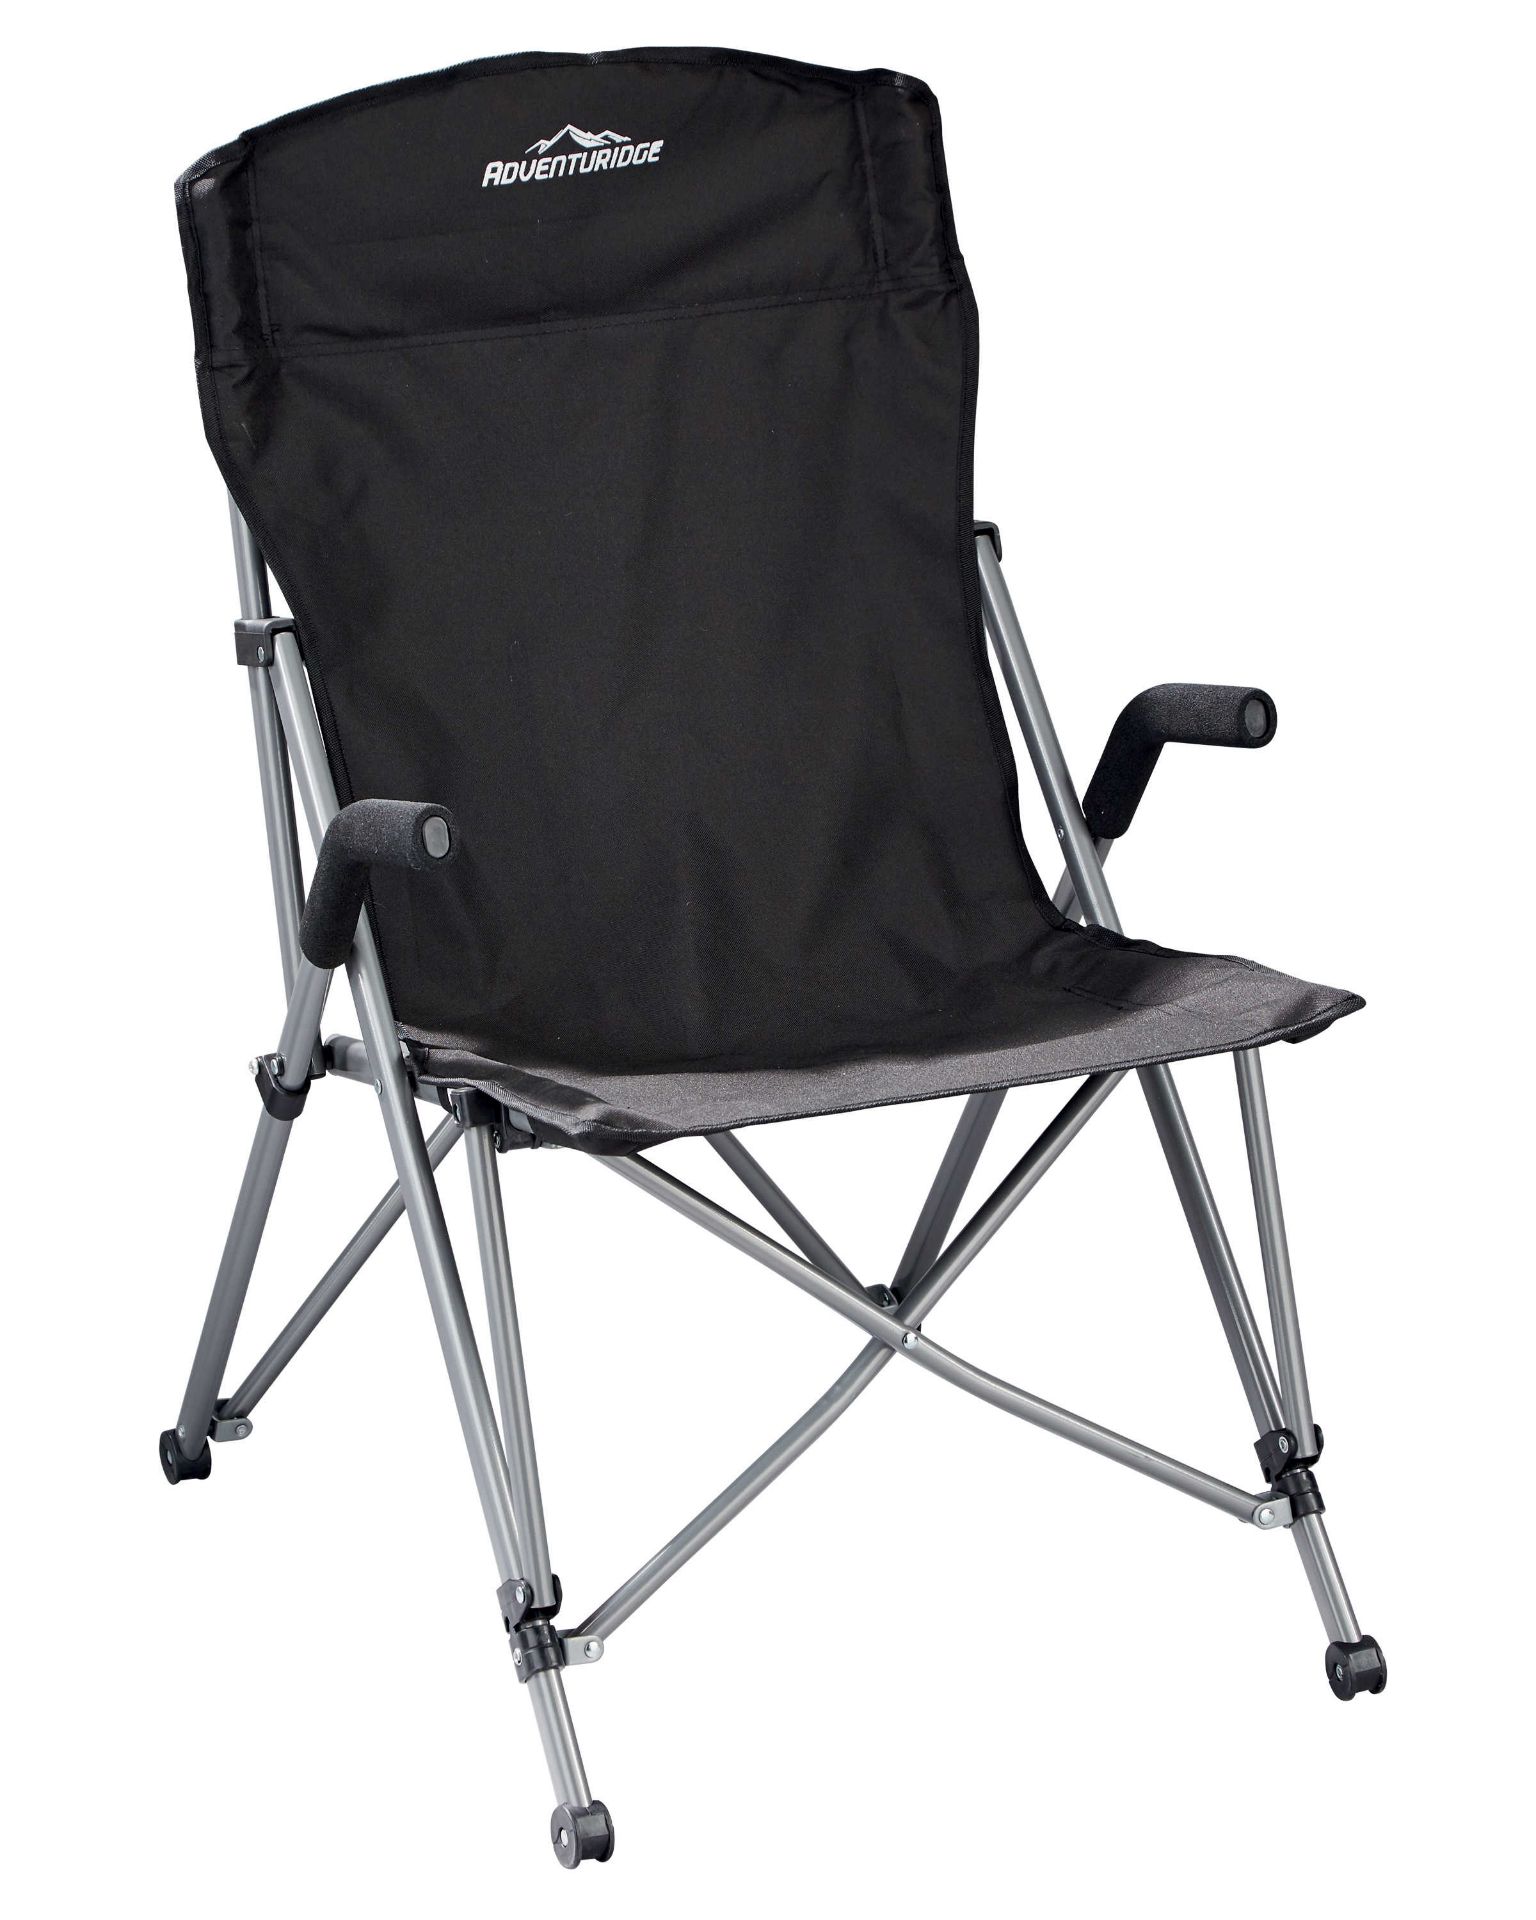 V *TRADE QTY* Brand New Tourer/Expedition Chair In Silver/Black With Carry Case - Lightweight - Image 2 of 2